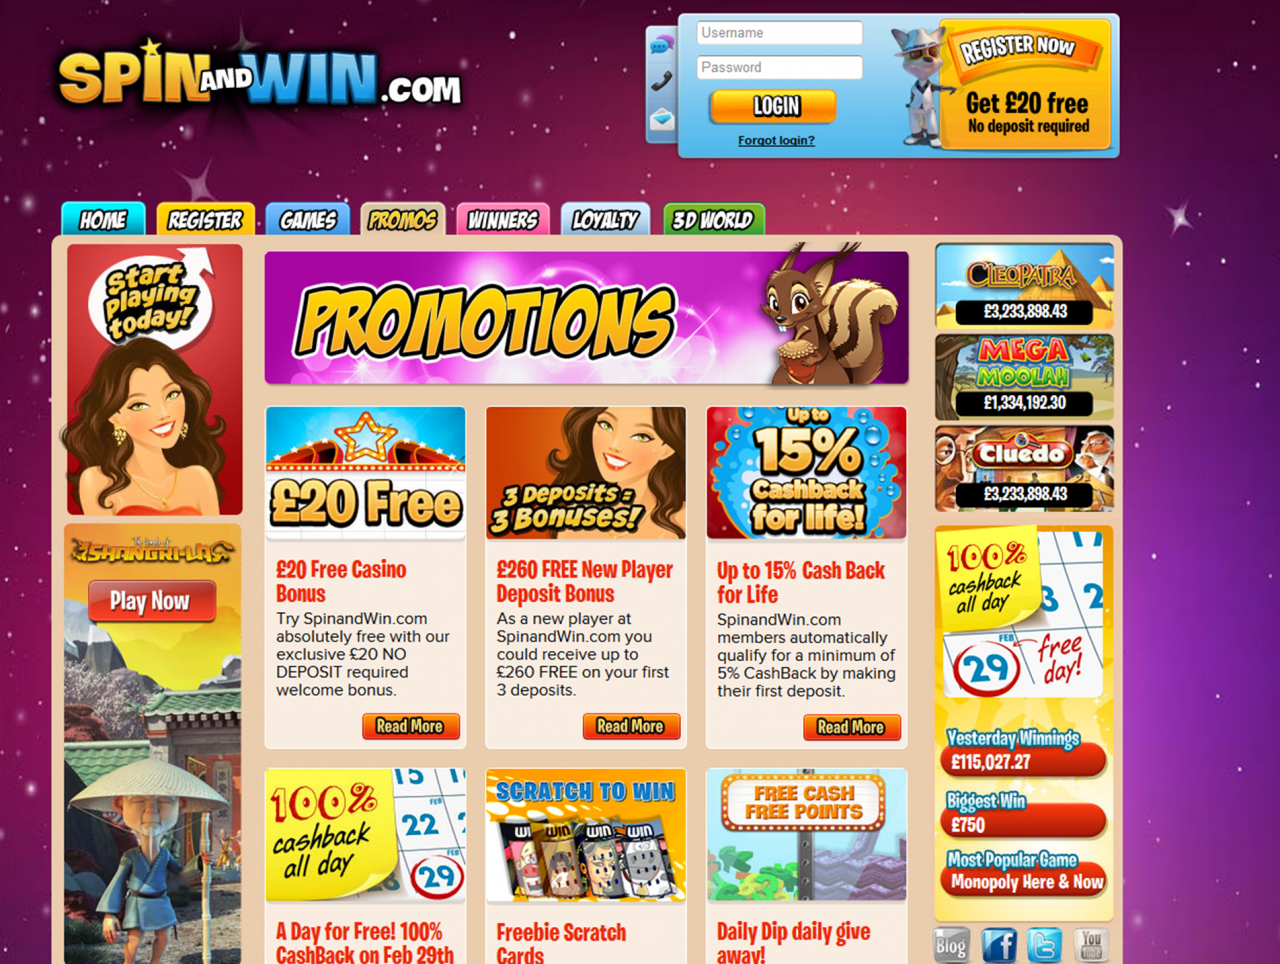 Play Spin And Win Free Online With No Deposit Required At Spinandwin